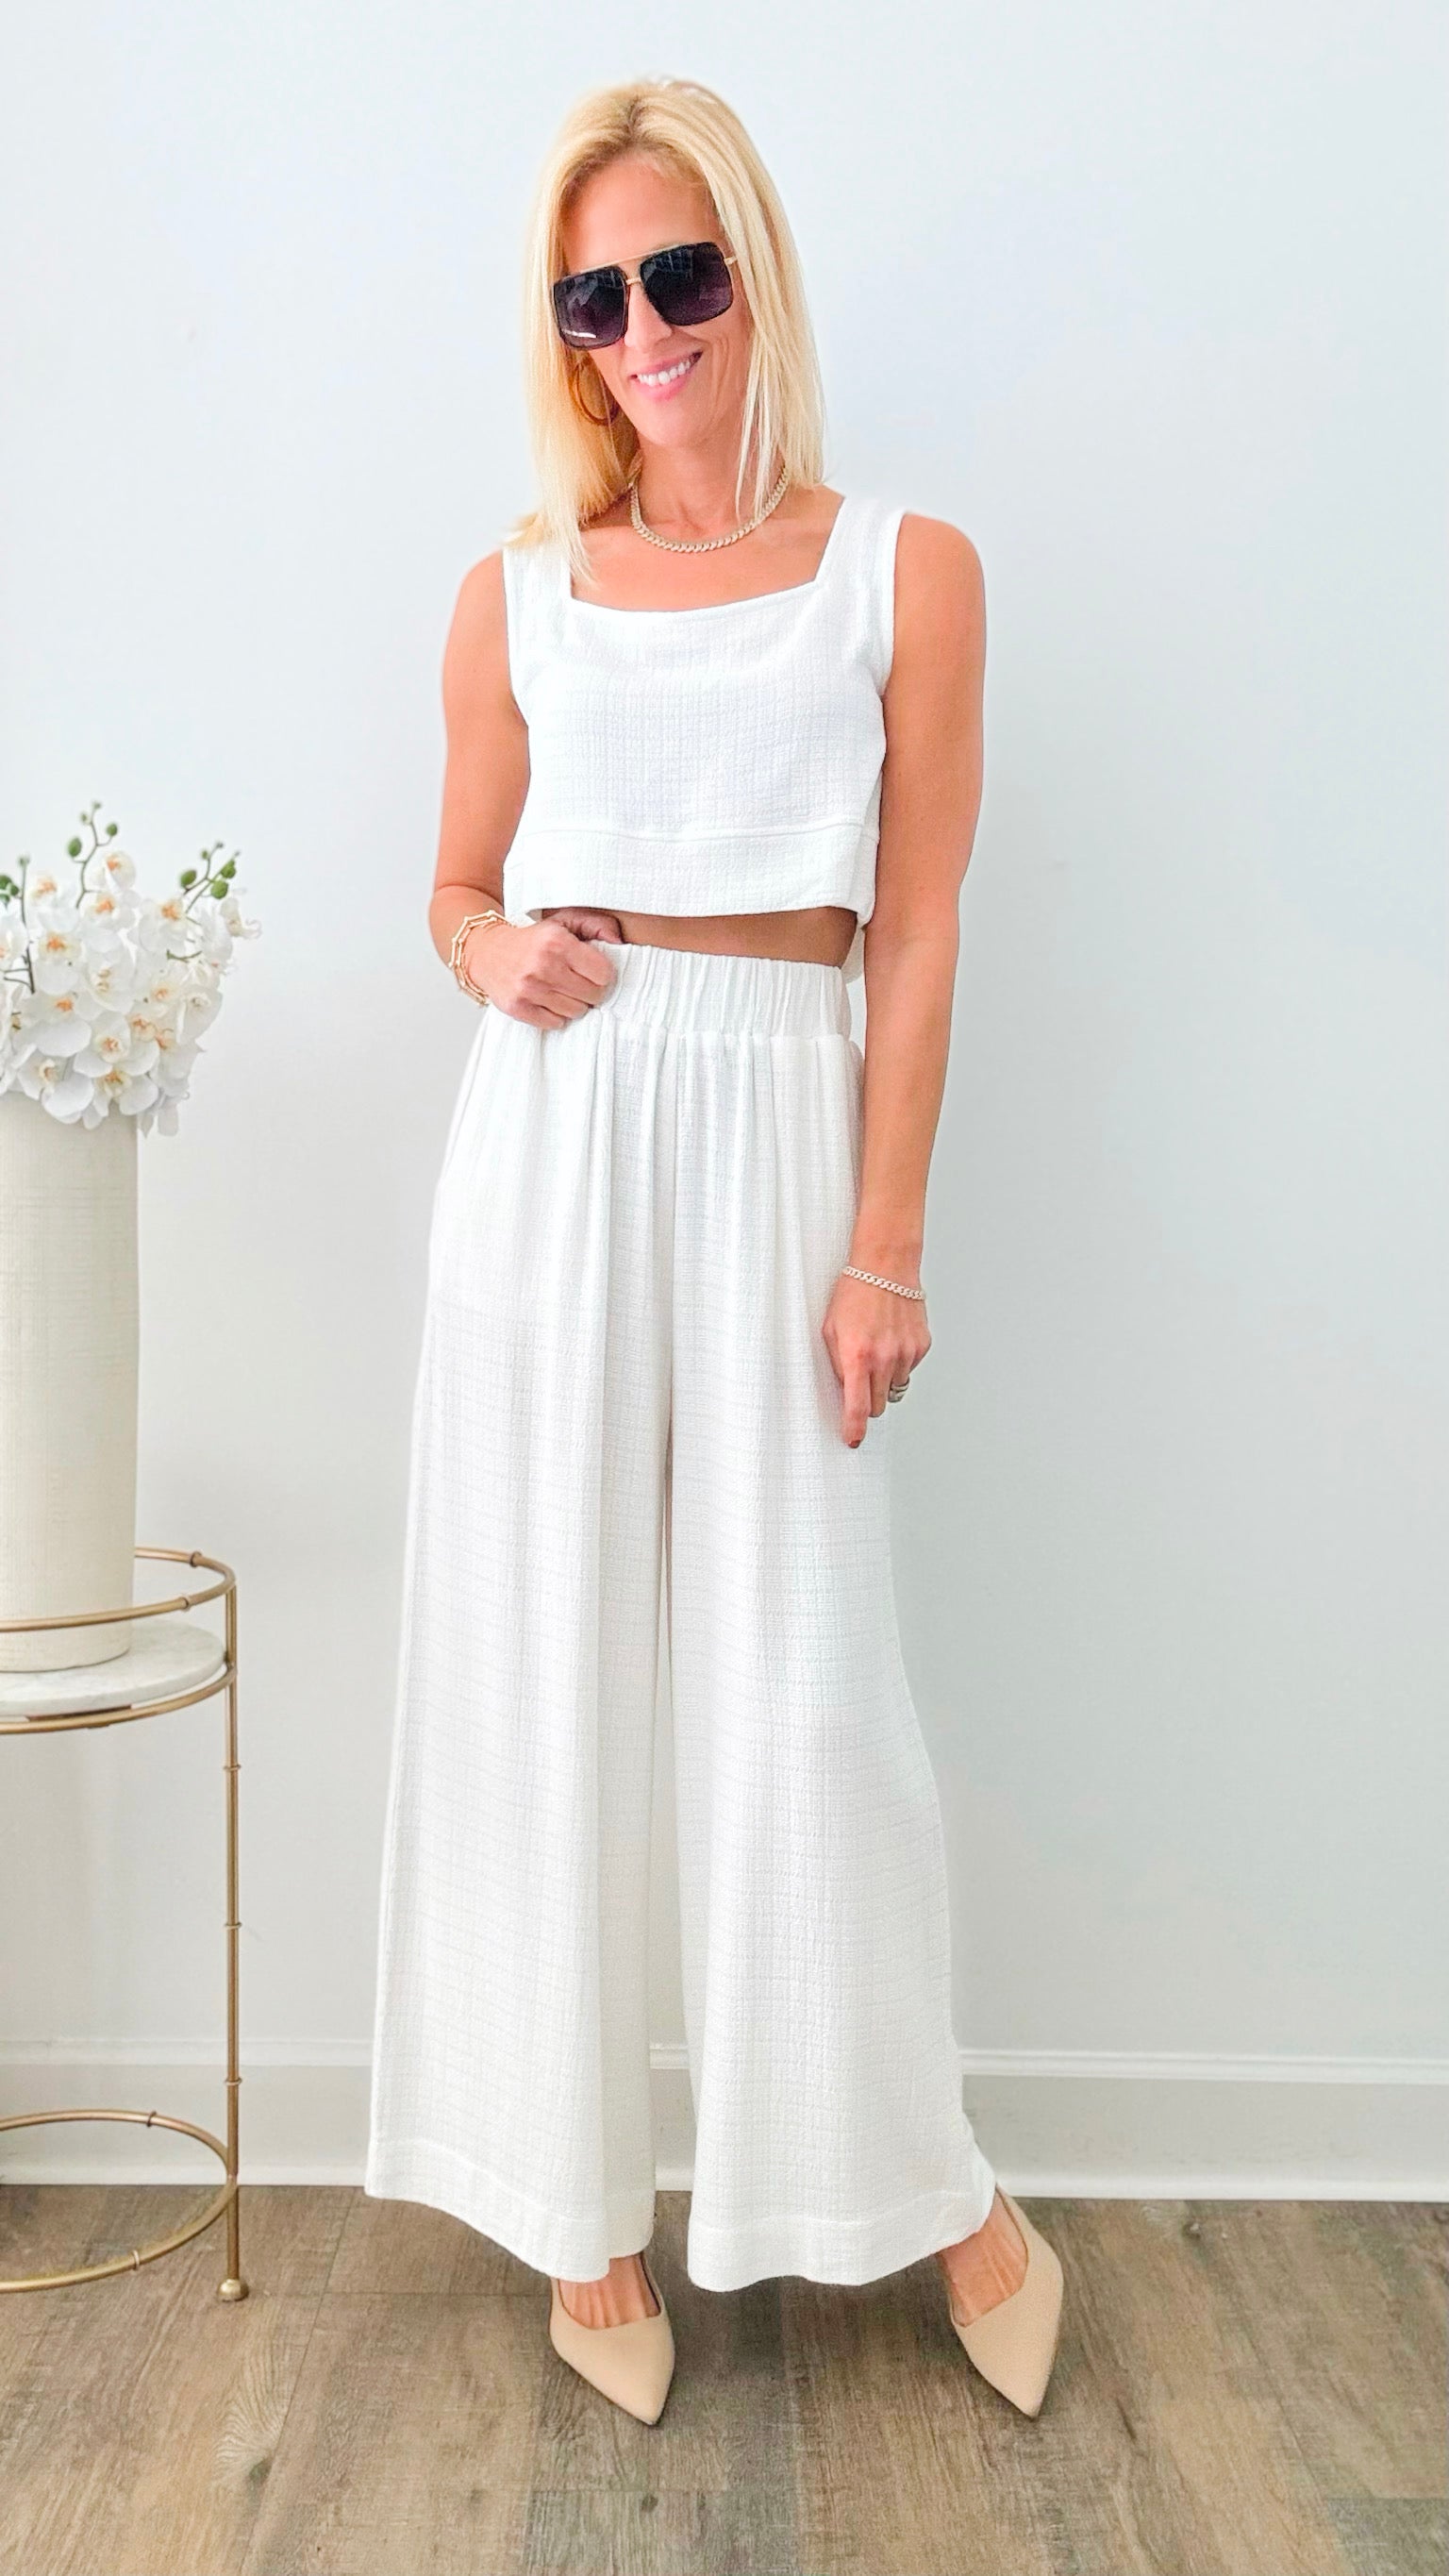 Lovely Linen Wide Leg Pants-170 Bottoms-Before You-Coastal Bloom Boutique, find the trendiest versions of the popular styles and looks Located in Indialantic, FL